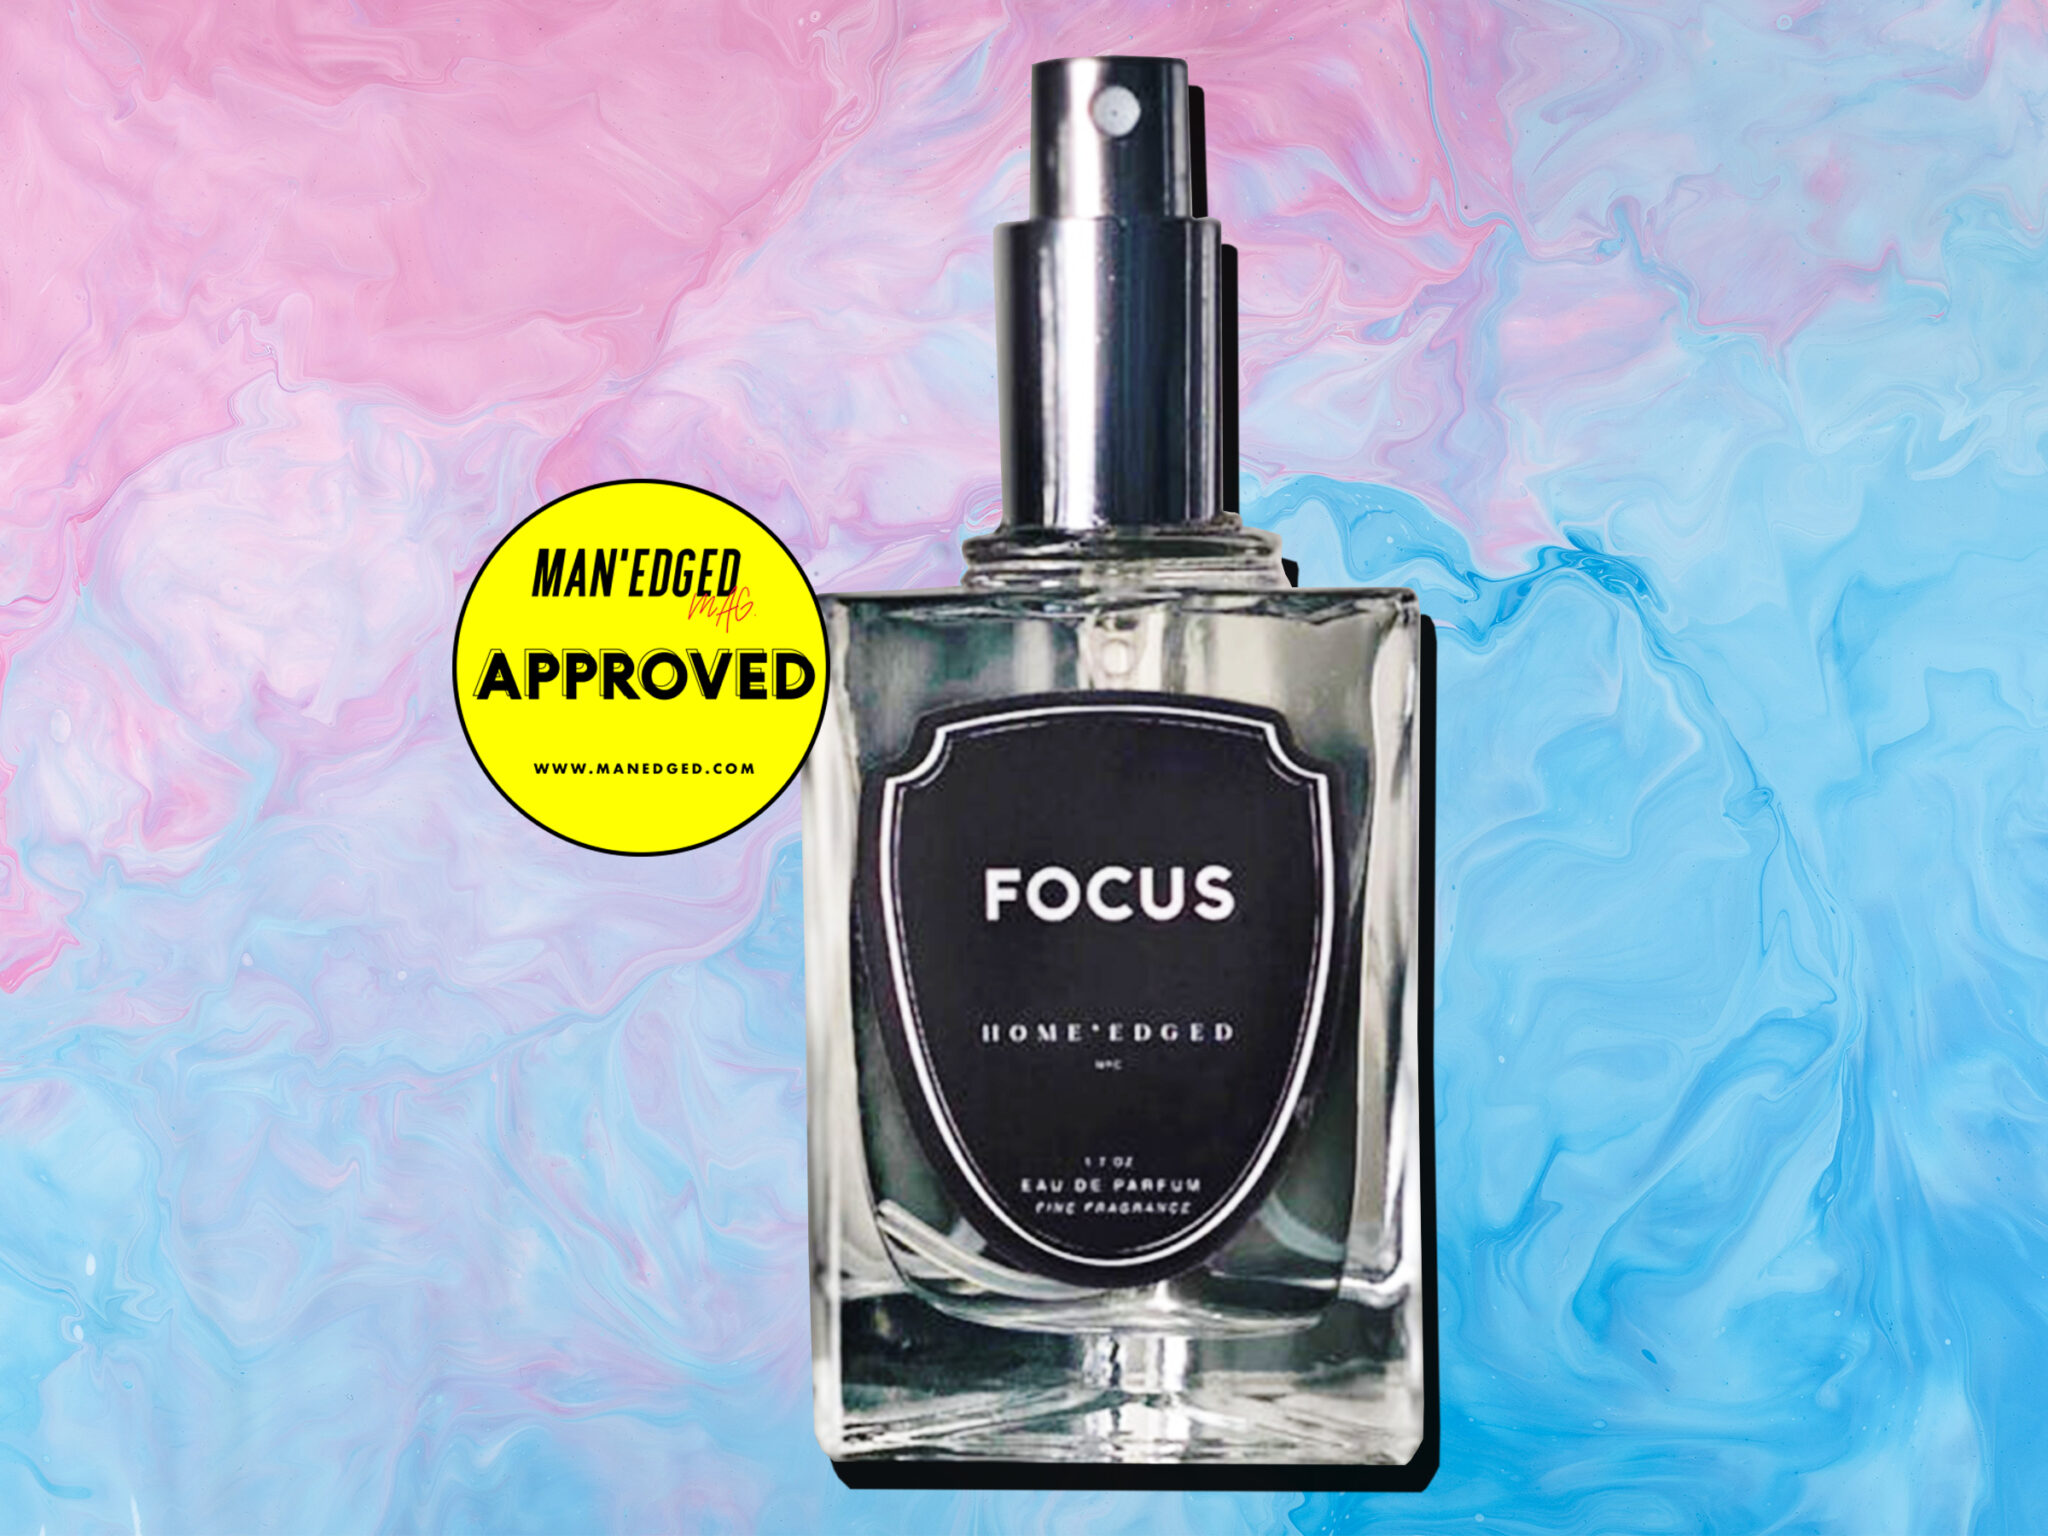 Non Cheesy Valentine's Day gifts for him featuring the FOCUS eau de parfum for men by HOME'edged NYC